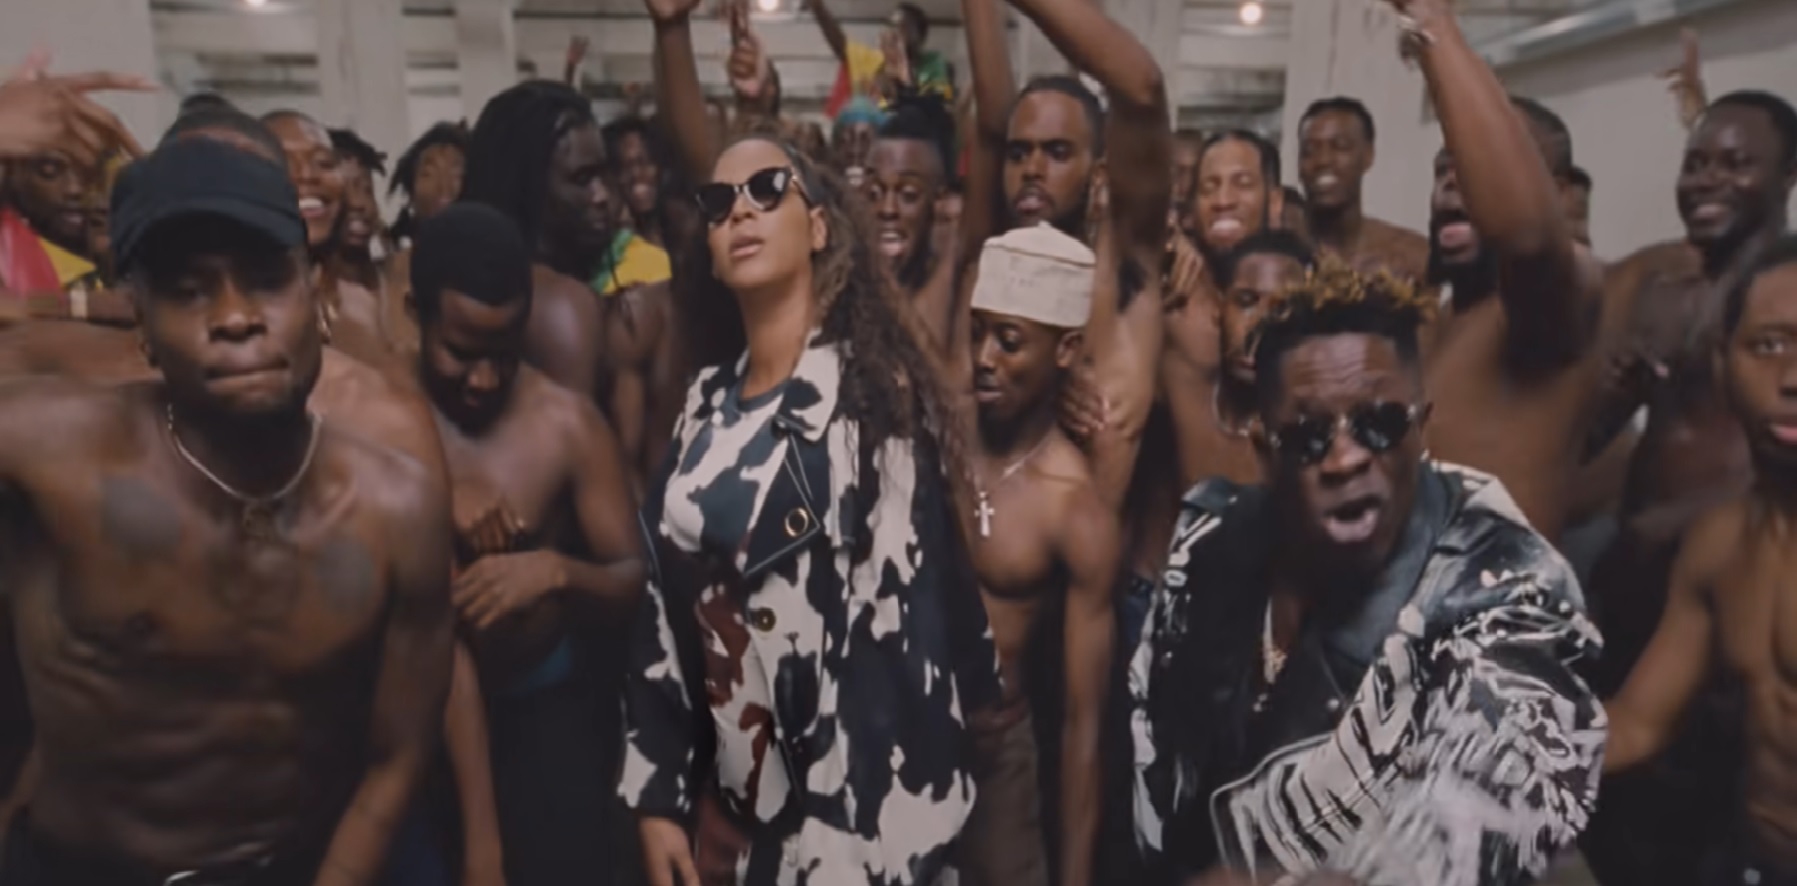 Already, how one dancer, said to be a Ghanaian ‘grinded’ Beyoncé in the video has gotten people talking.